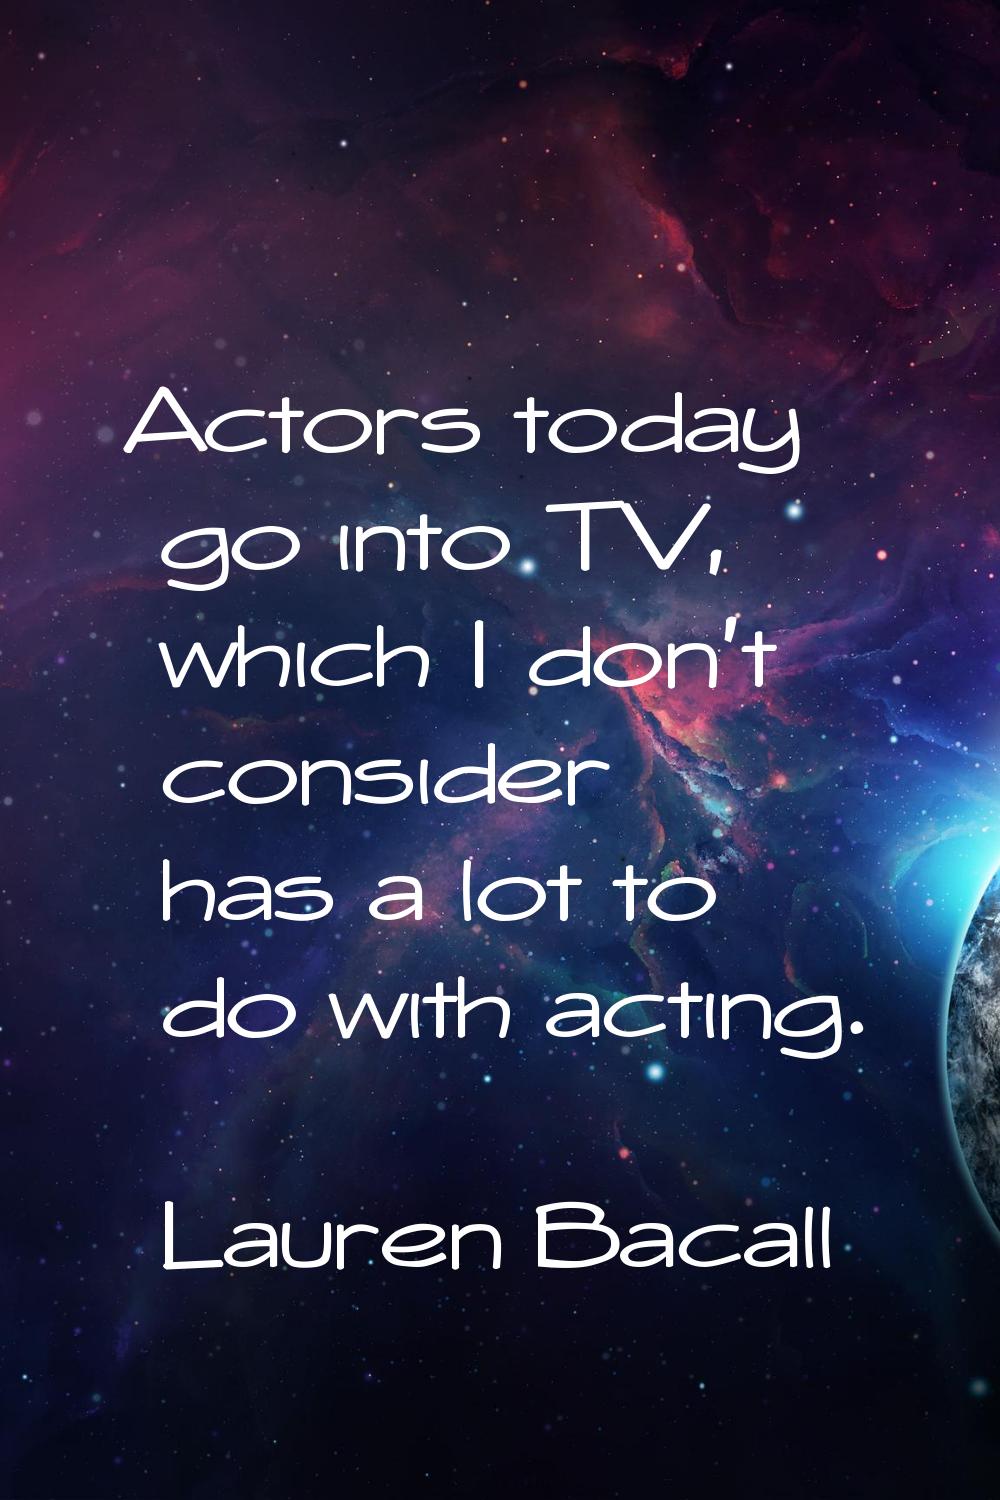 Actors today go into TV, which I don't consider has a lot to do with acting.